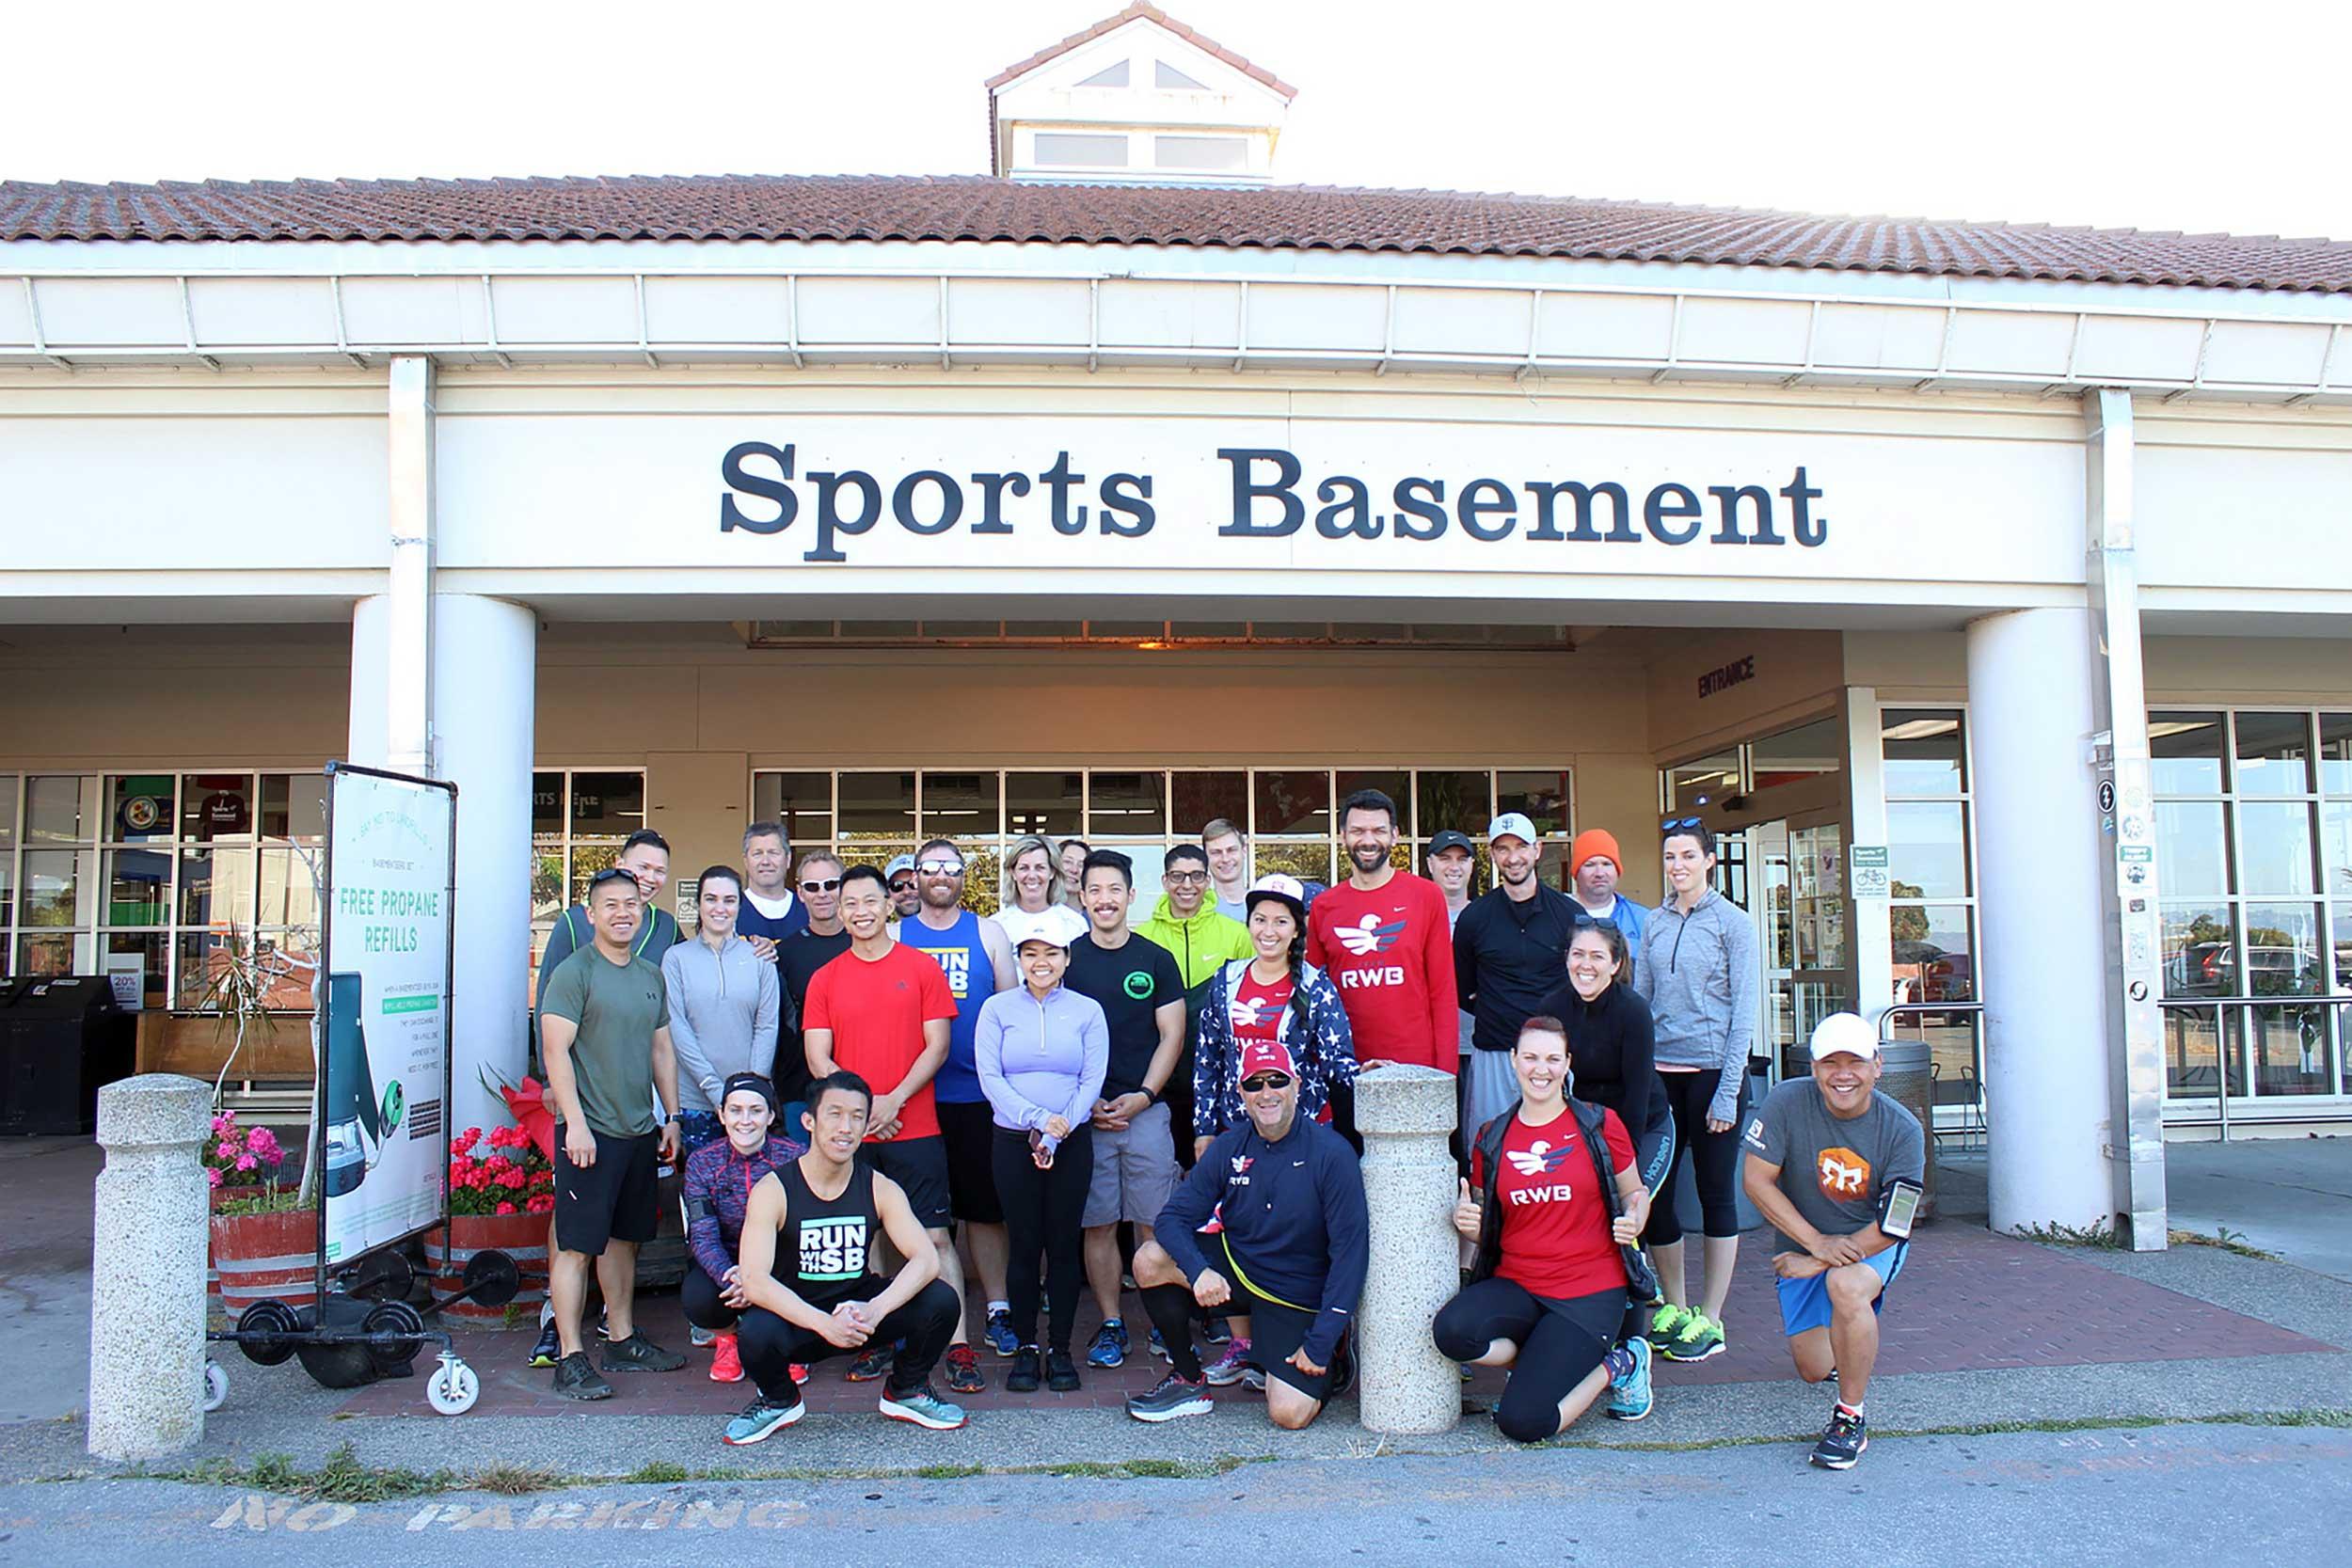 A group of people gathered for an event in front of Sports Basement in the Presidio.